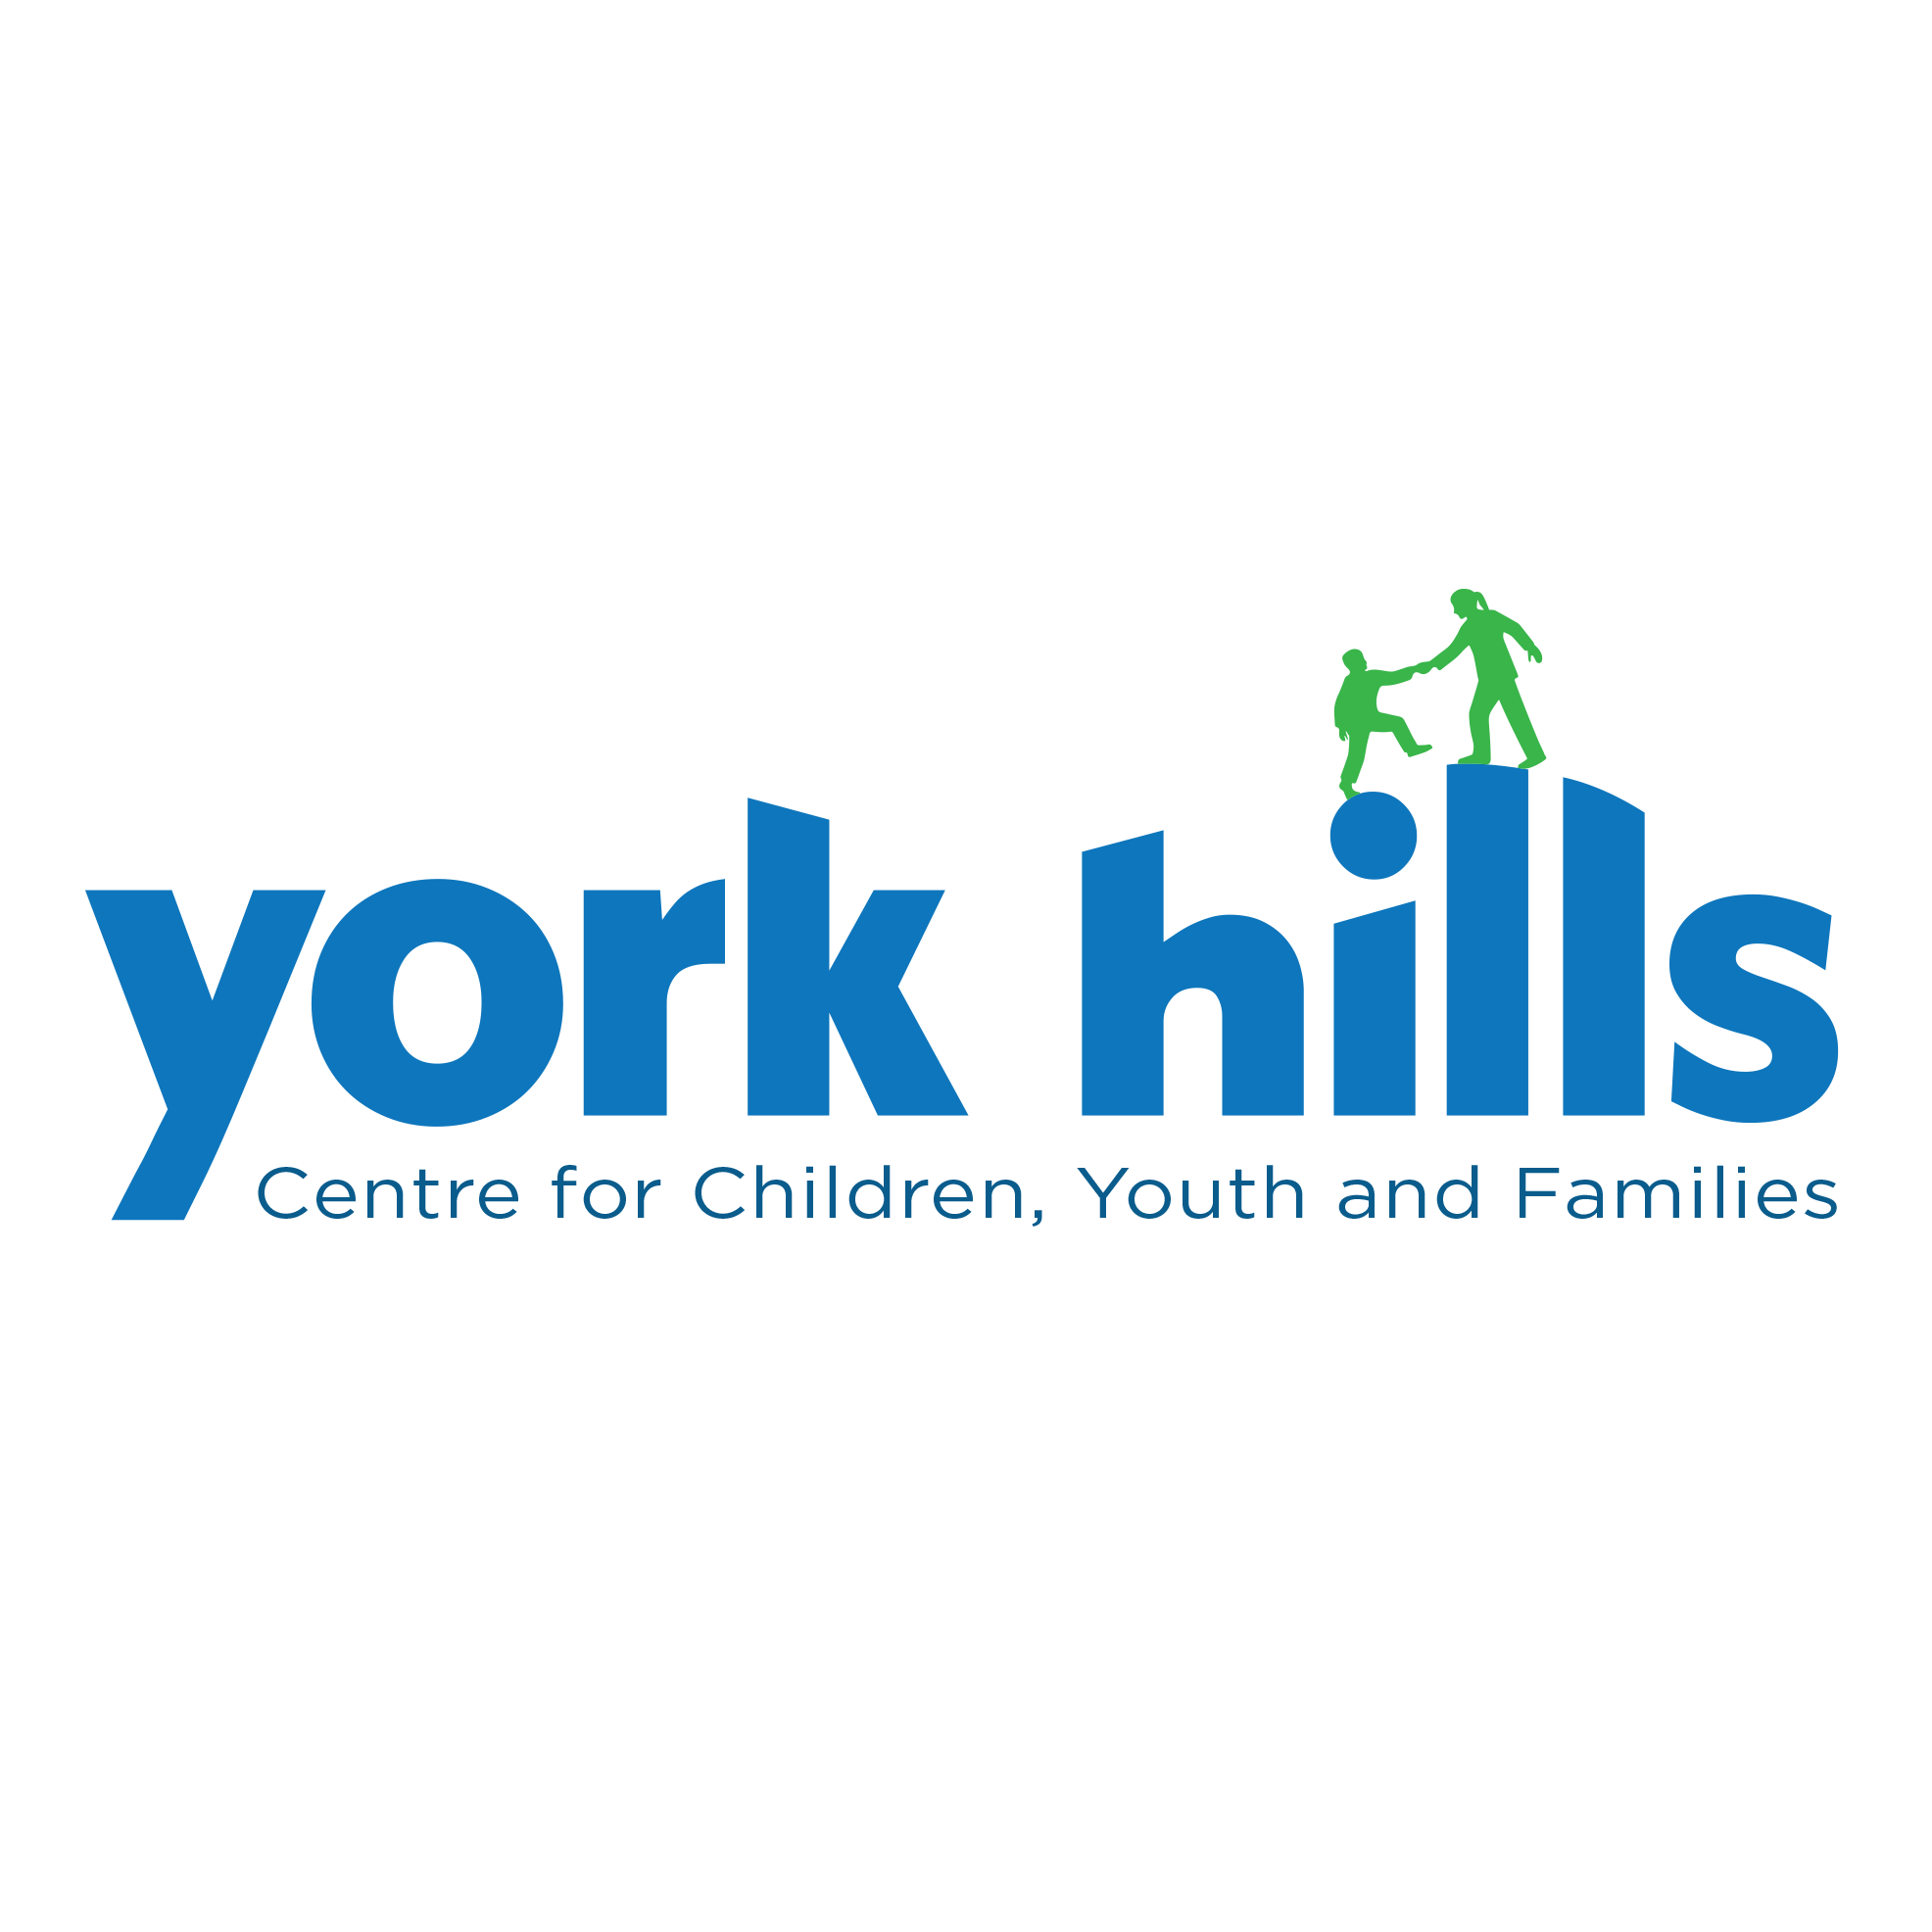 We’re here to help children, youth (0 - 18 years) and their families in York Region with high-quality mental health services.